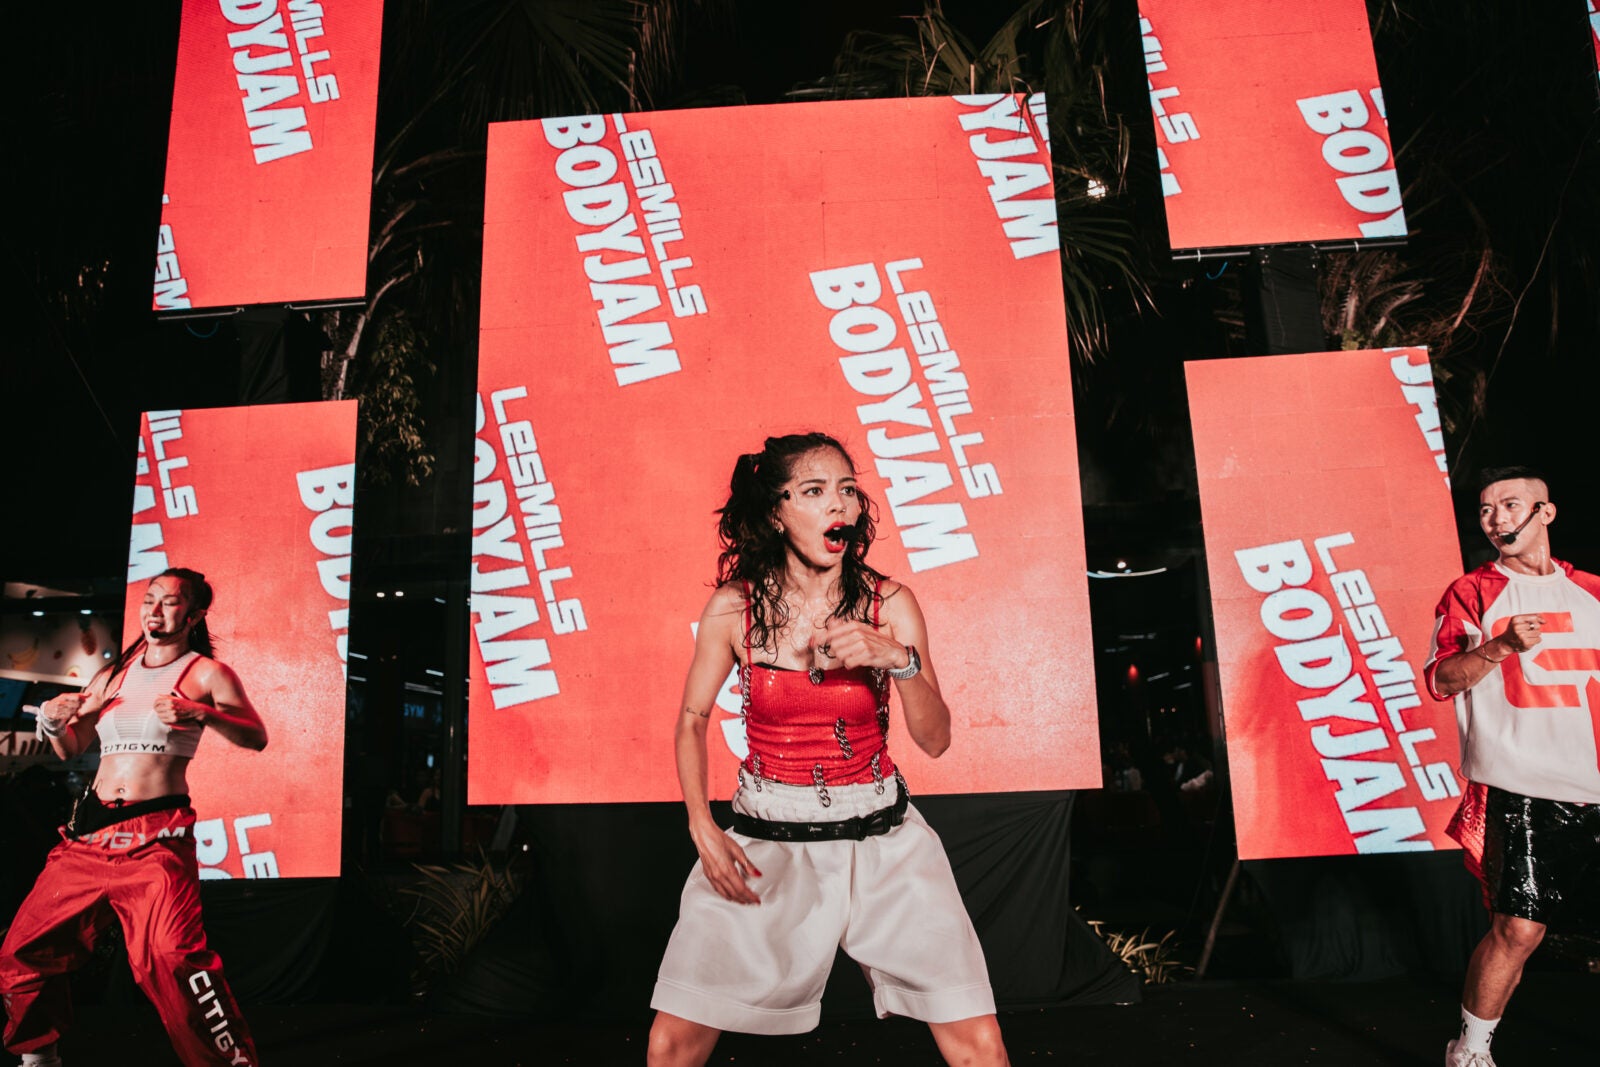 A young energised Asian woman in white shorts and red tank stands in the middle of a stage while talking through a microphone attachment. Behind her are two other fitness instructors mirroring her and the company's branding "Les Mills Bodyjam" printed in the background.